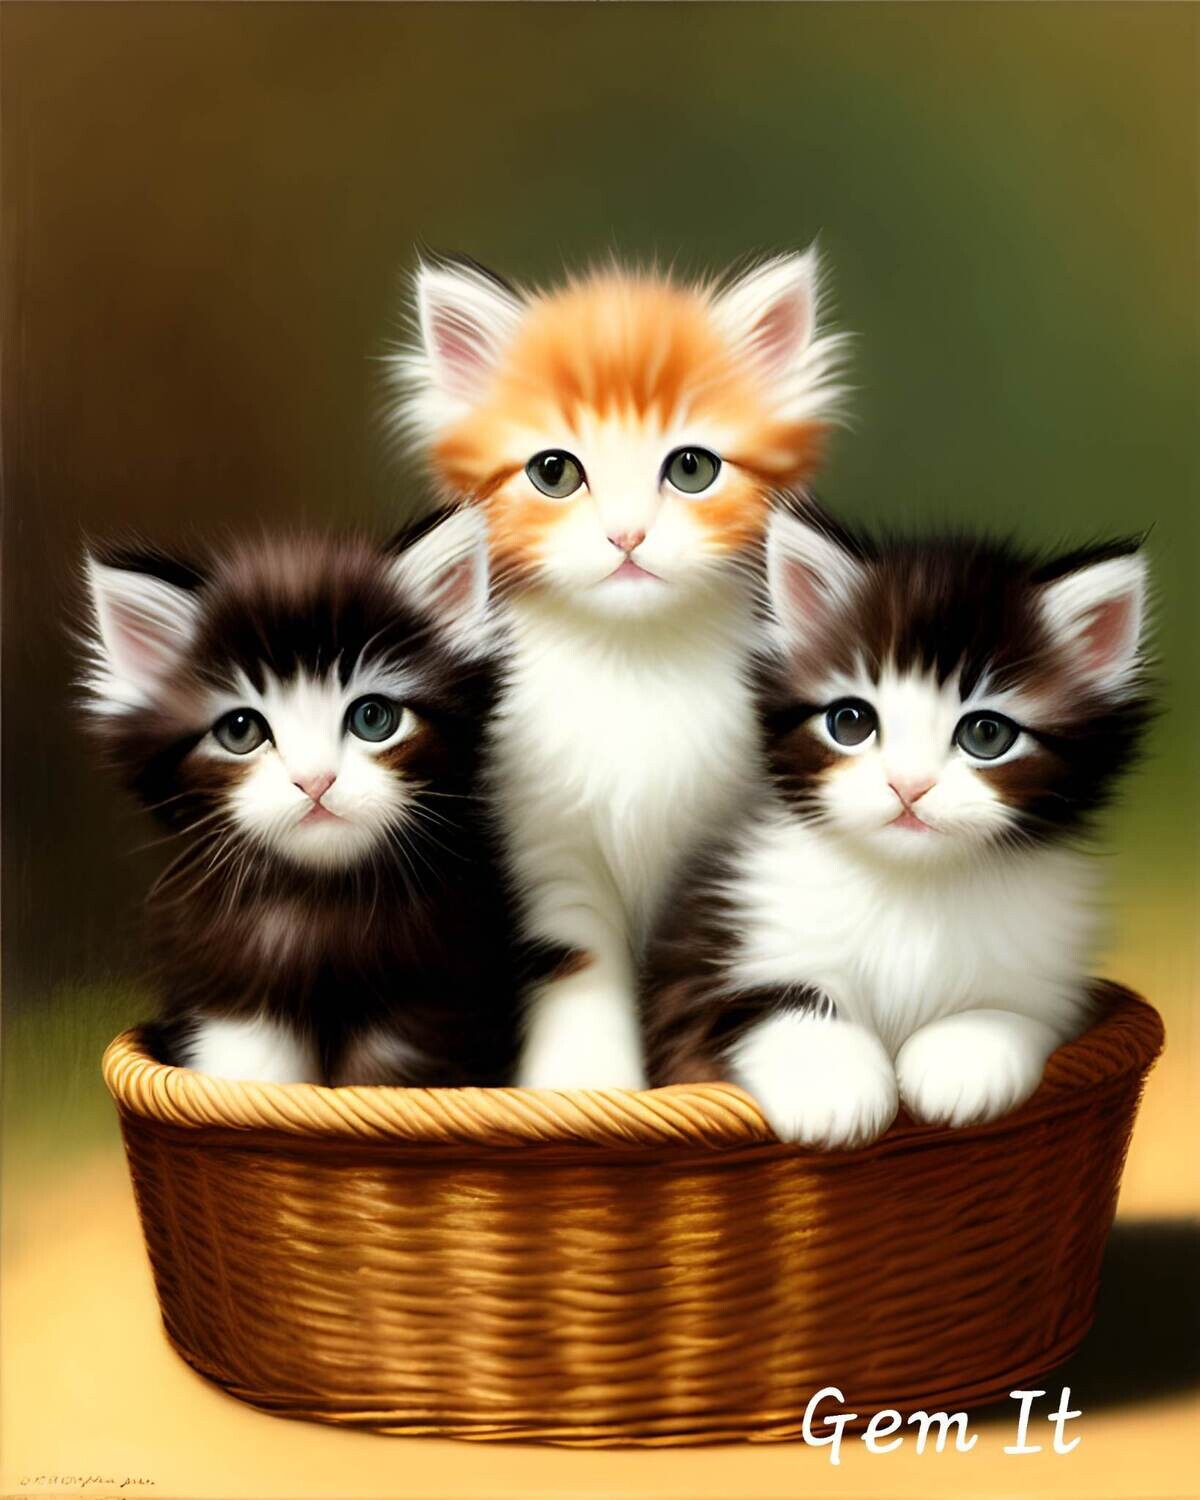 Kittens in a Basket 2 - Specially ordered for you. Delivery is approximately 4 - 6 weeks.